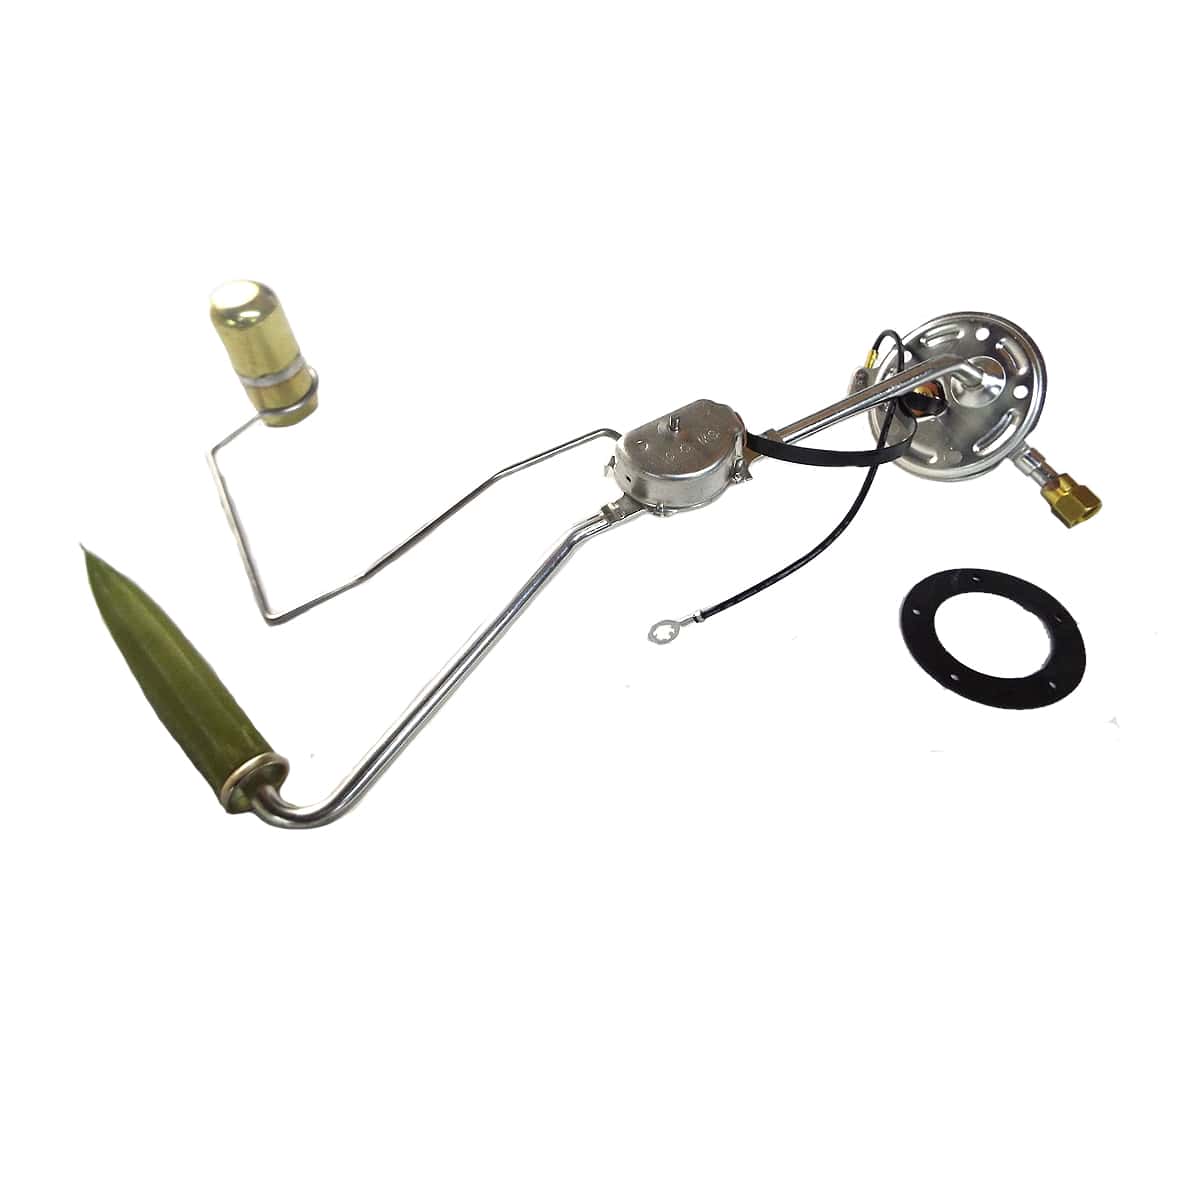 1960-1966 Gas Tank Sending Unit Chevrolet and GMC Pickup and Big Truck